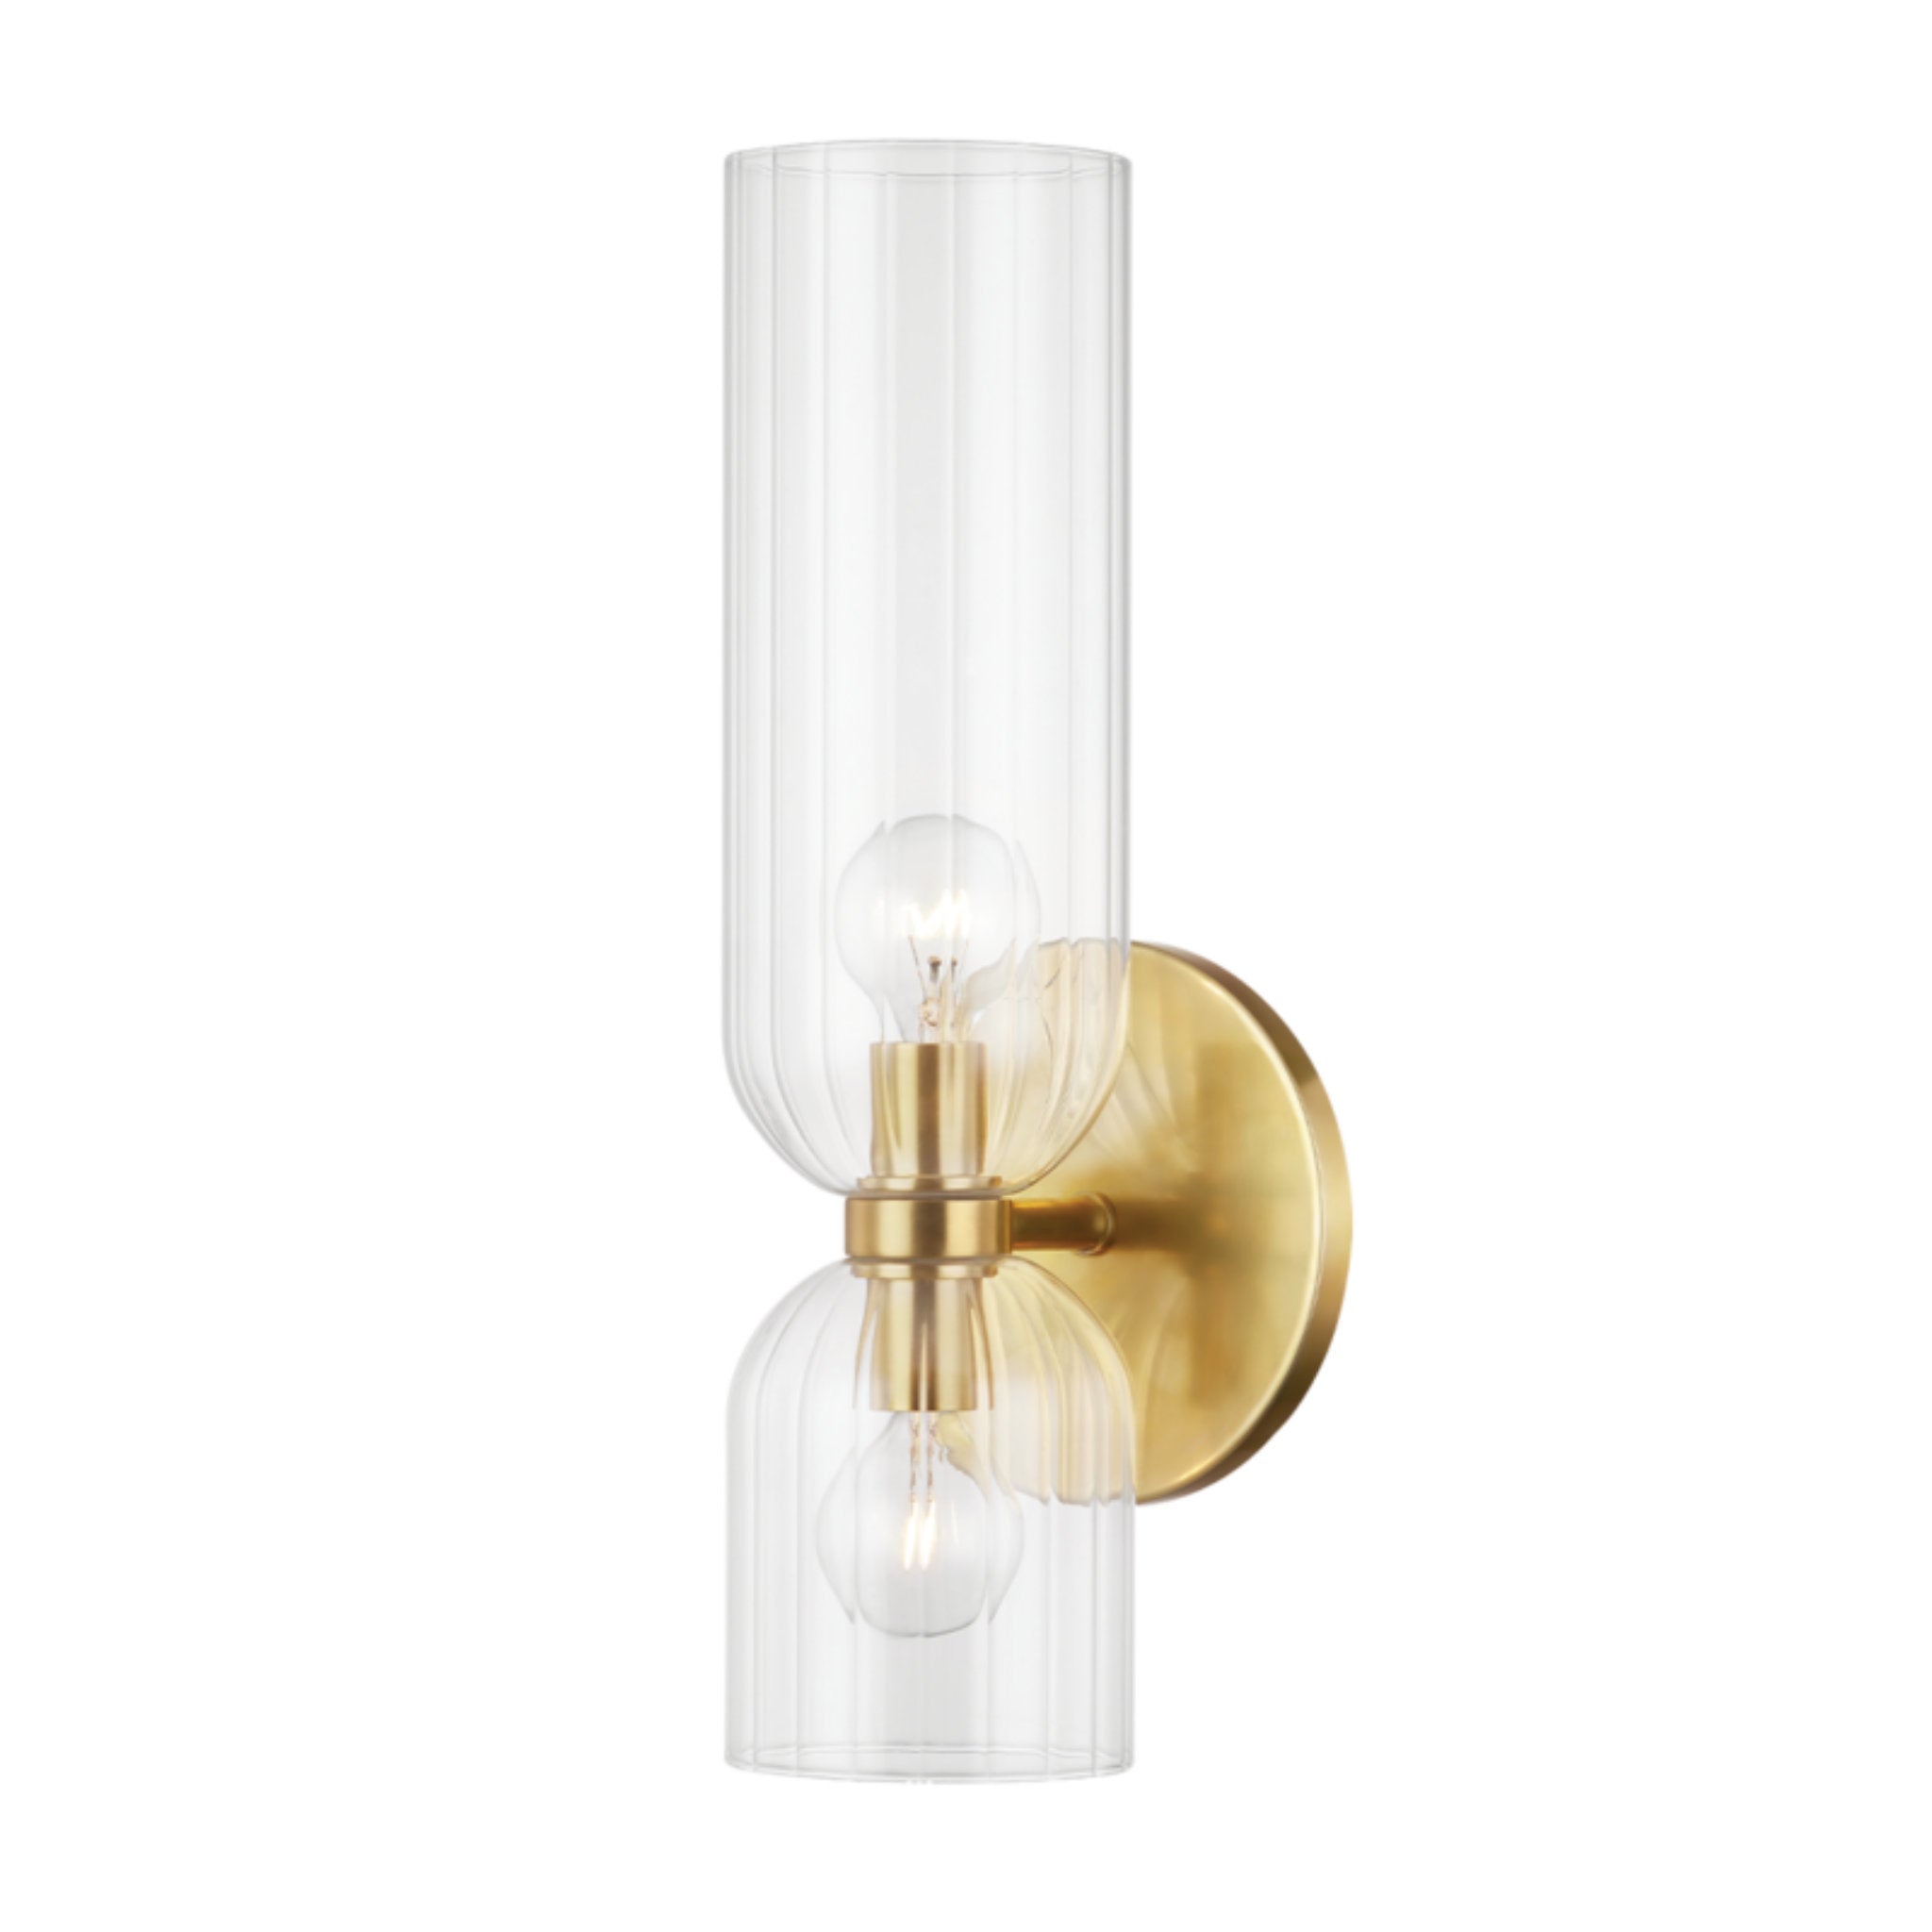 Sayville 2 Light Wall Sconce in Aged Brass